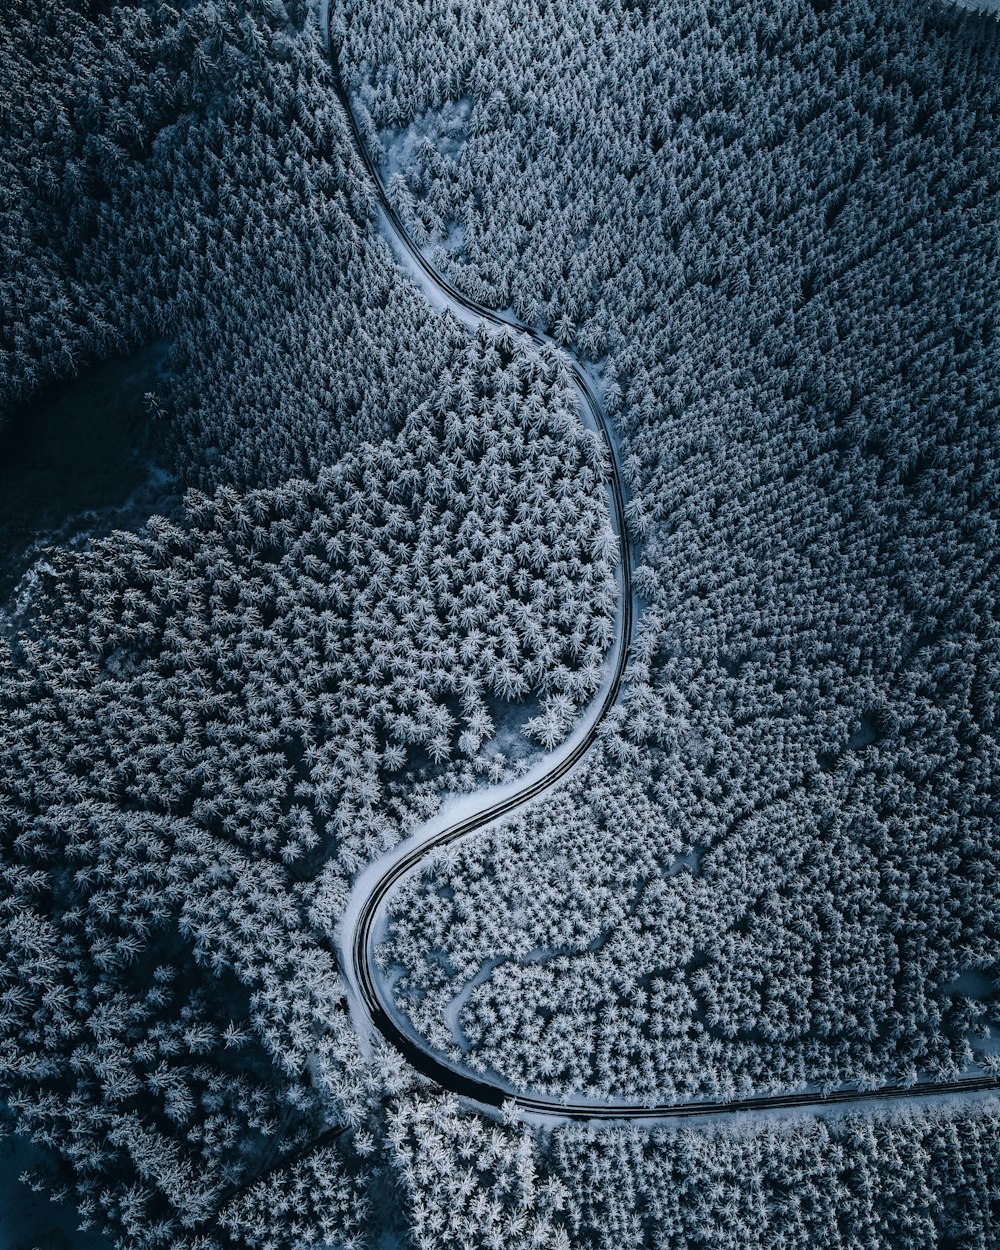 aerial view of road in the middle of snow covered ground